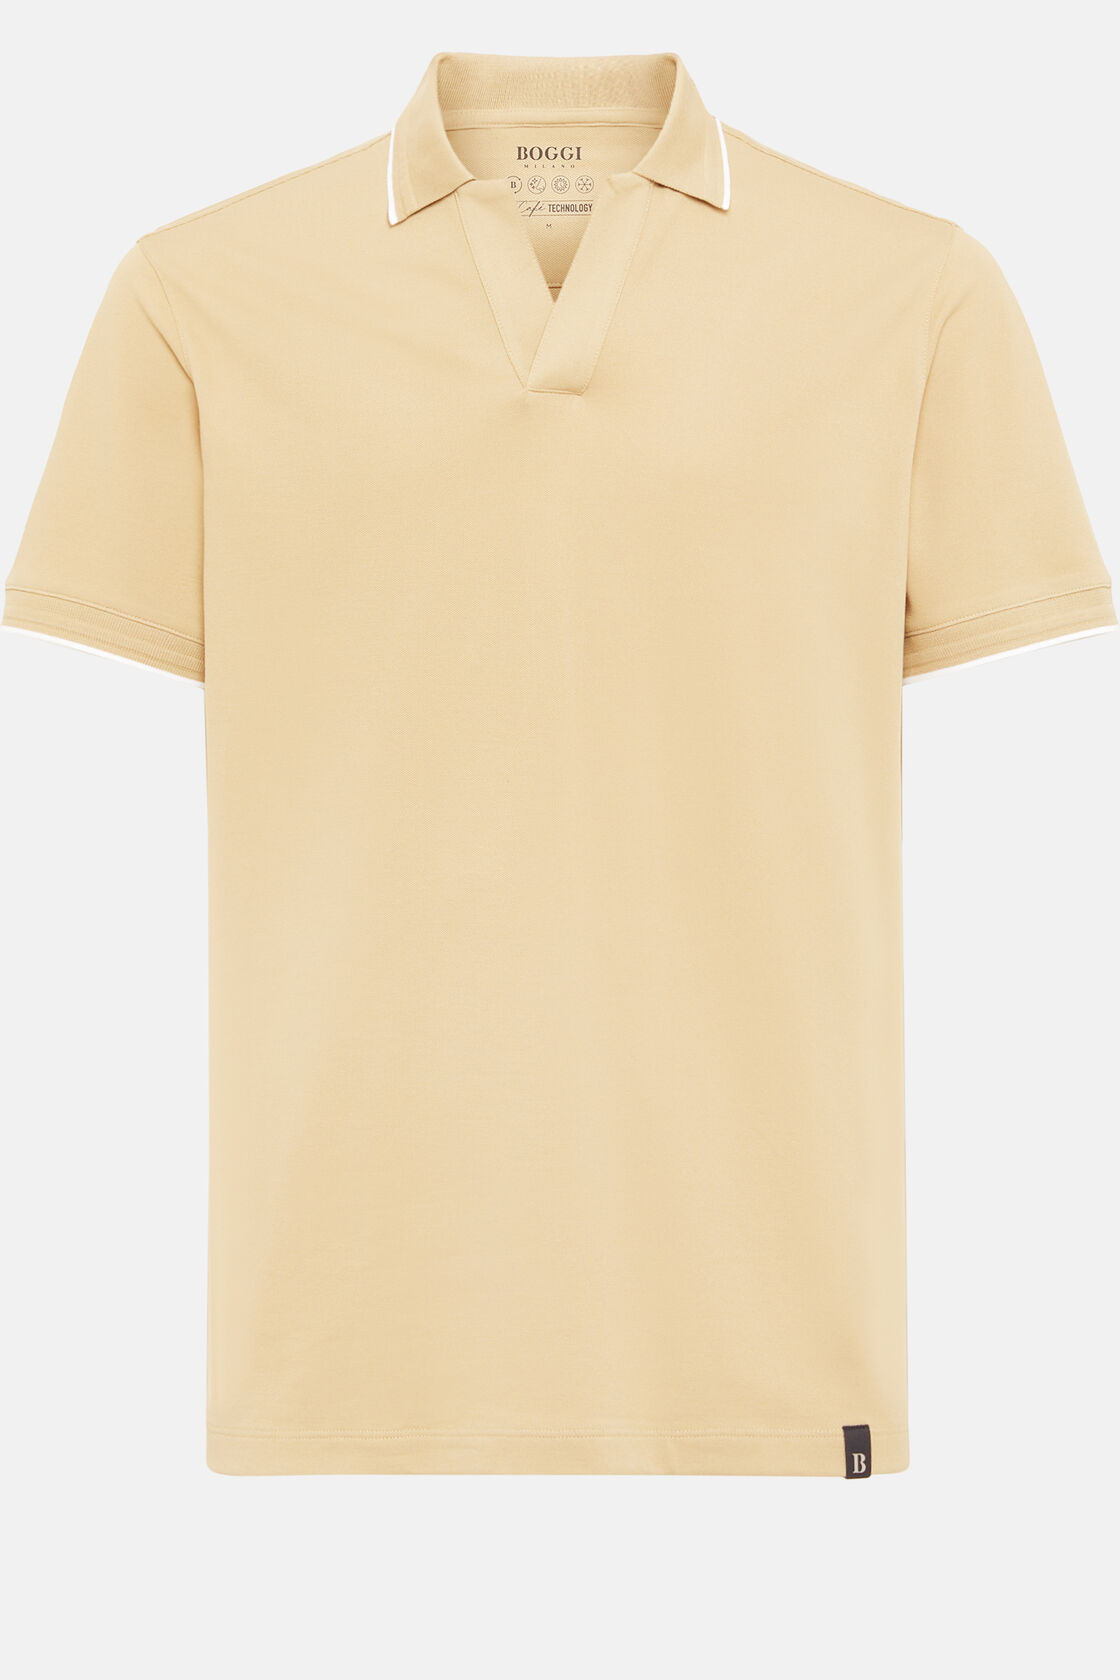 Polo in sustainable performance pique, Beige, hi-res